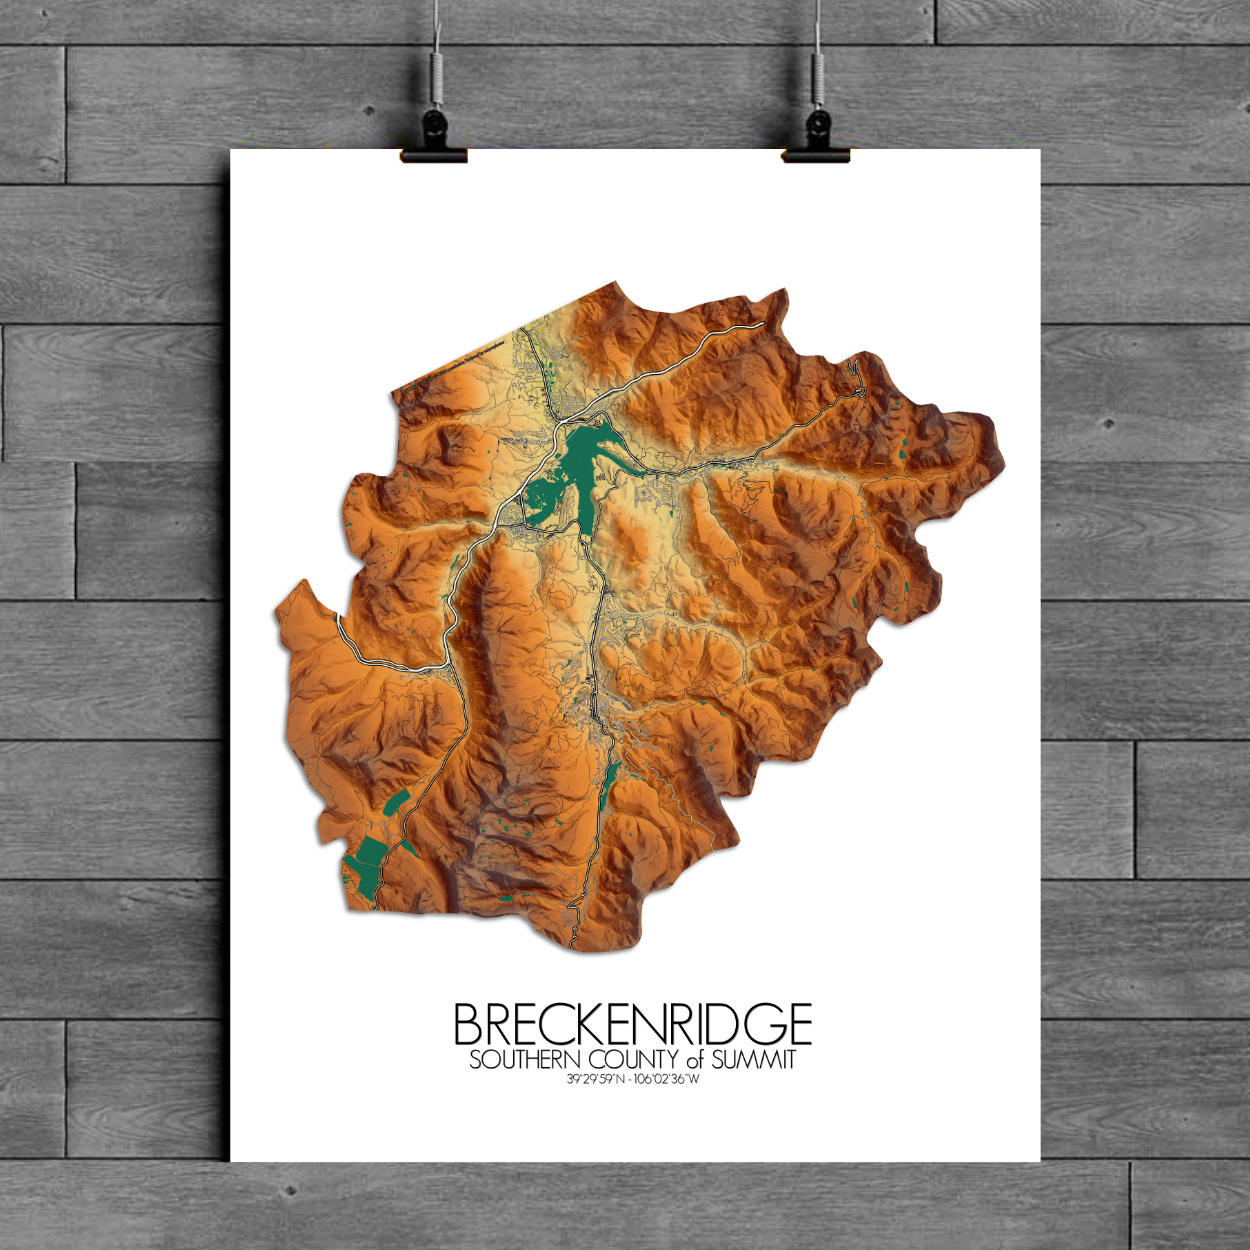 Portugal Map Wall Art Print Poster - Topographic Map of Portugal Count —  Maps As Art